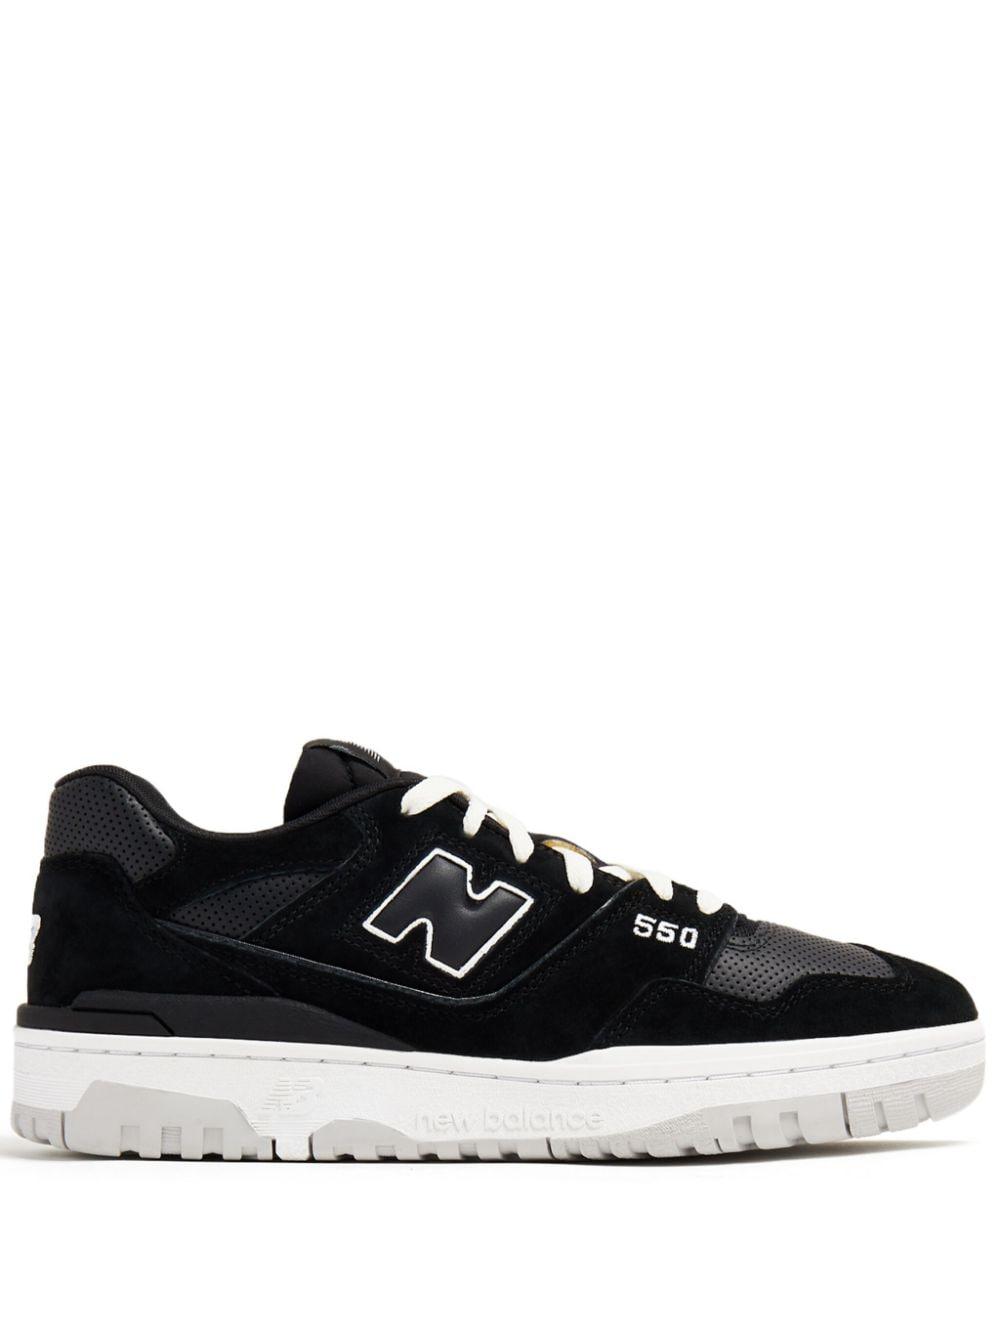 NEW BALANCE 550 suede-trimmed leather and mesh sneakers